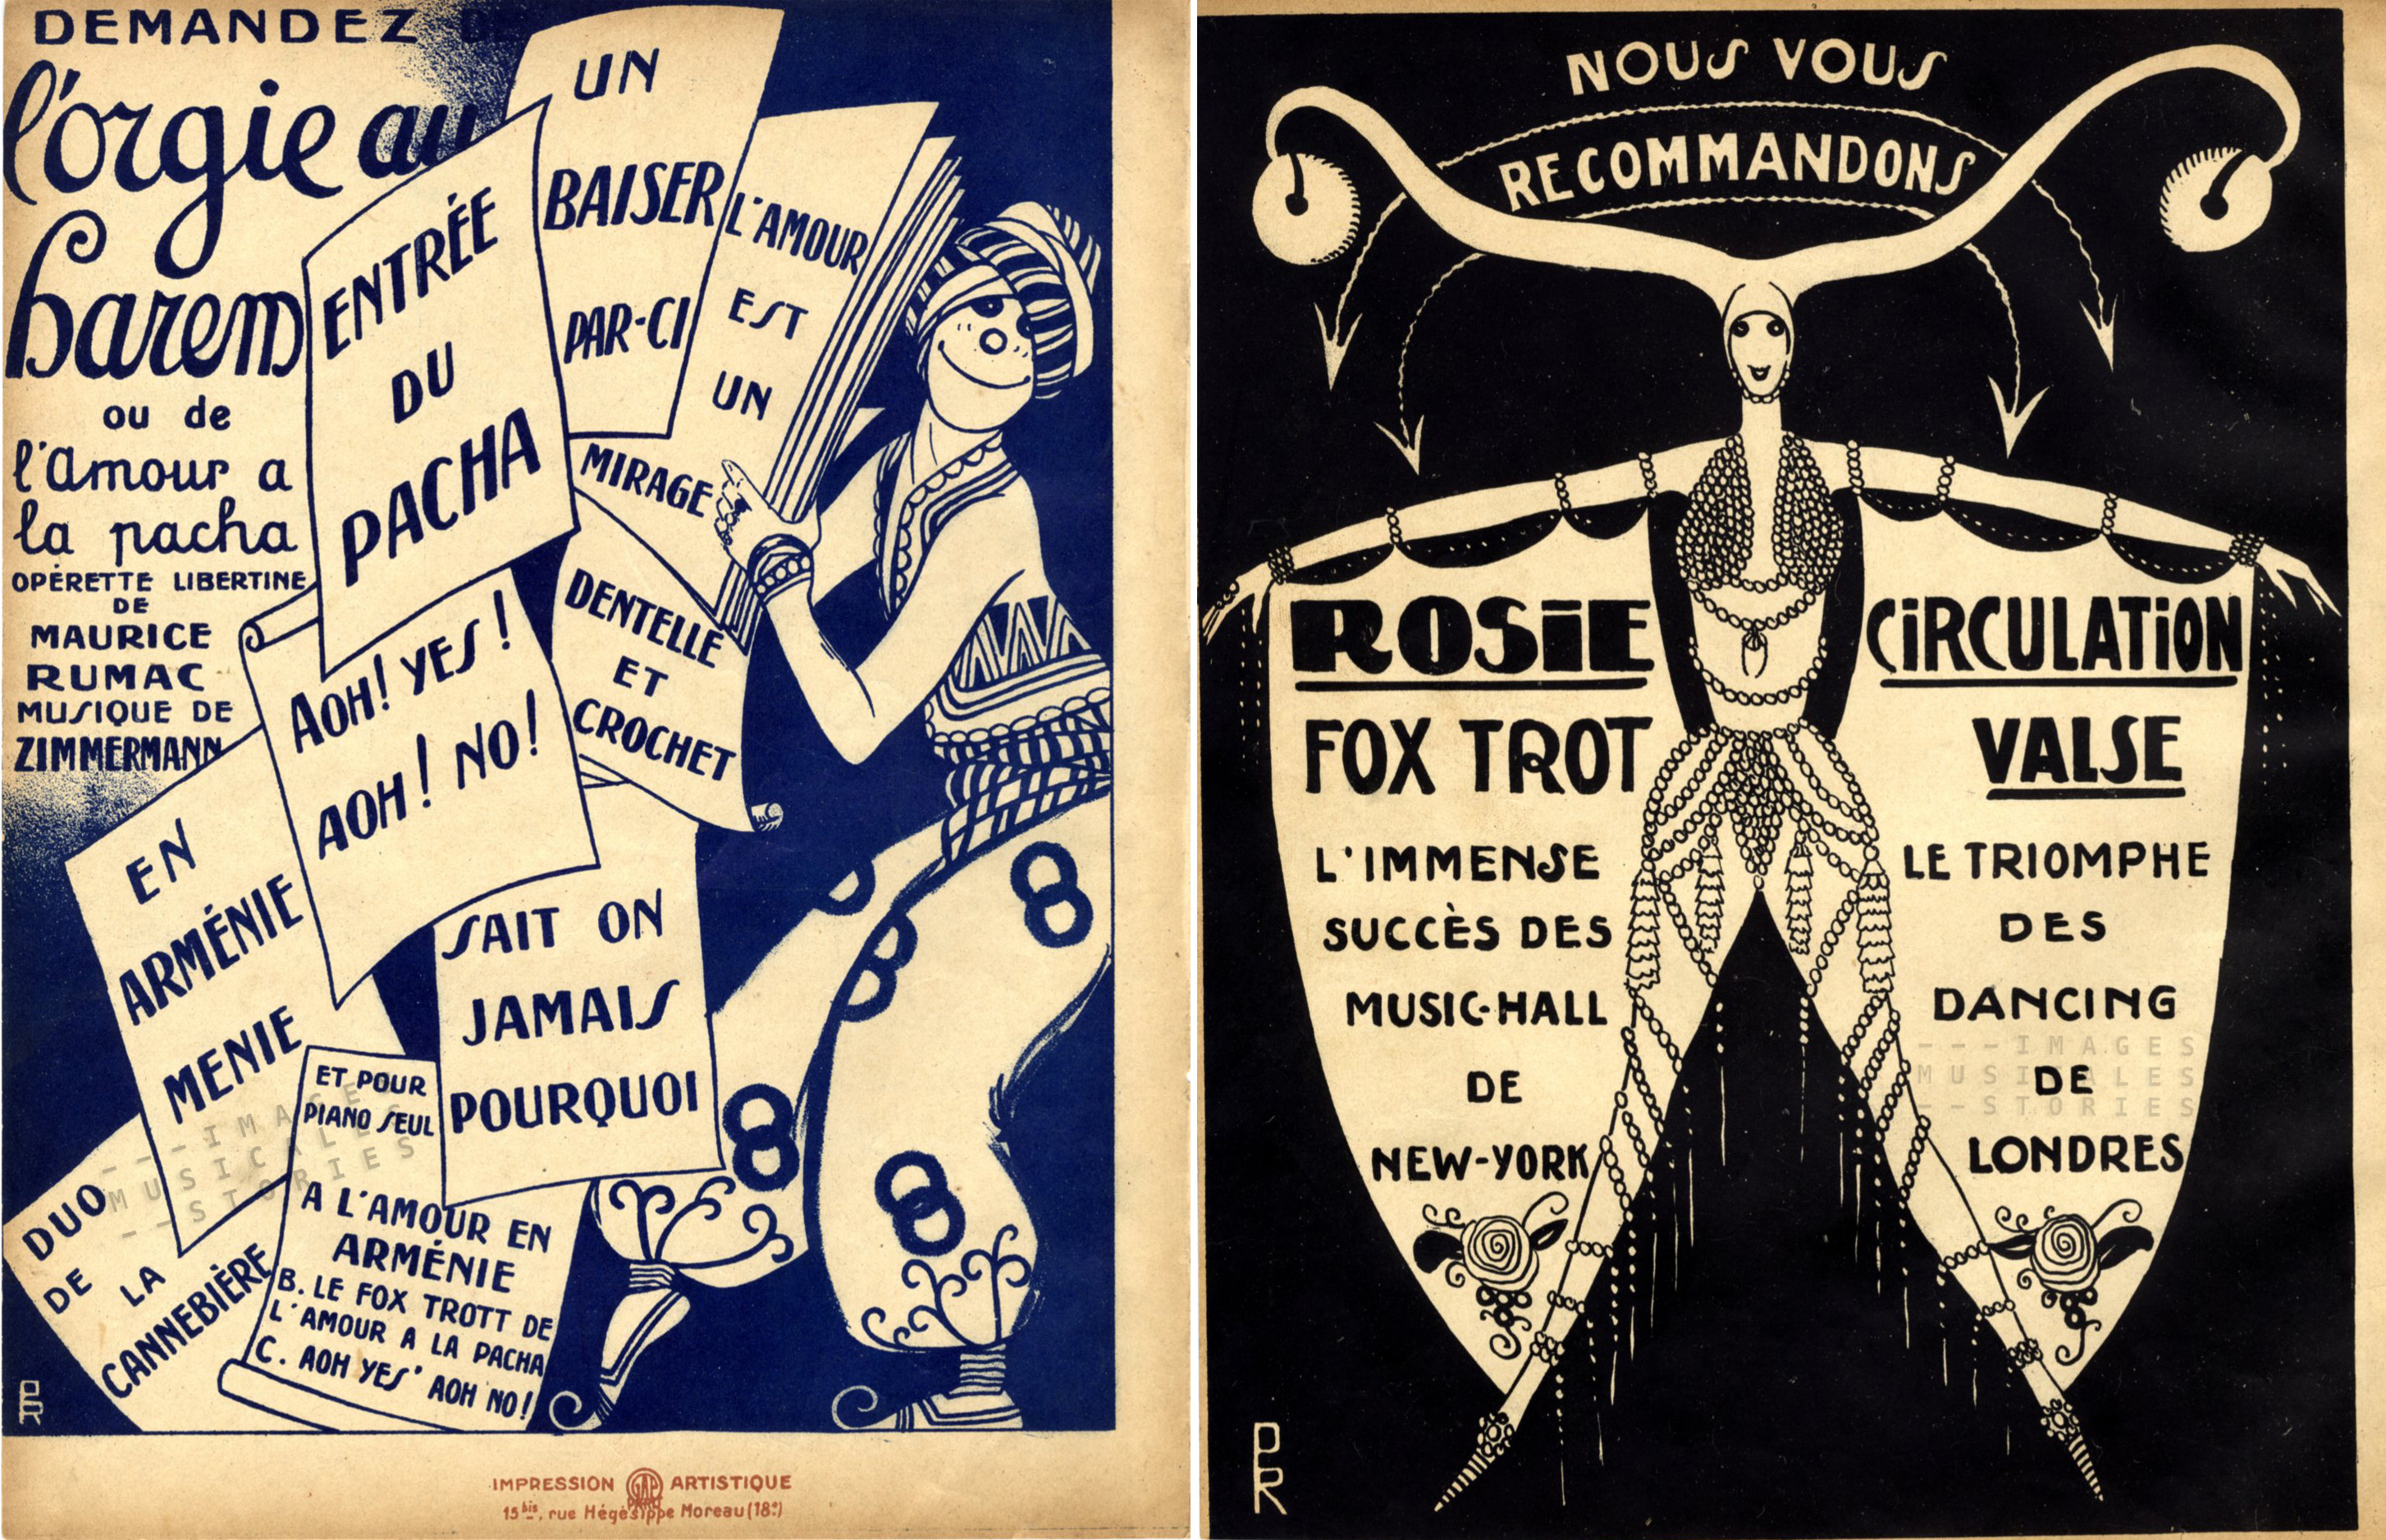 Two back covers illustrated by cartoonist Pol Rab, for publishers Pêle-Mêle (left) and Maillochon (right).